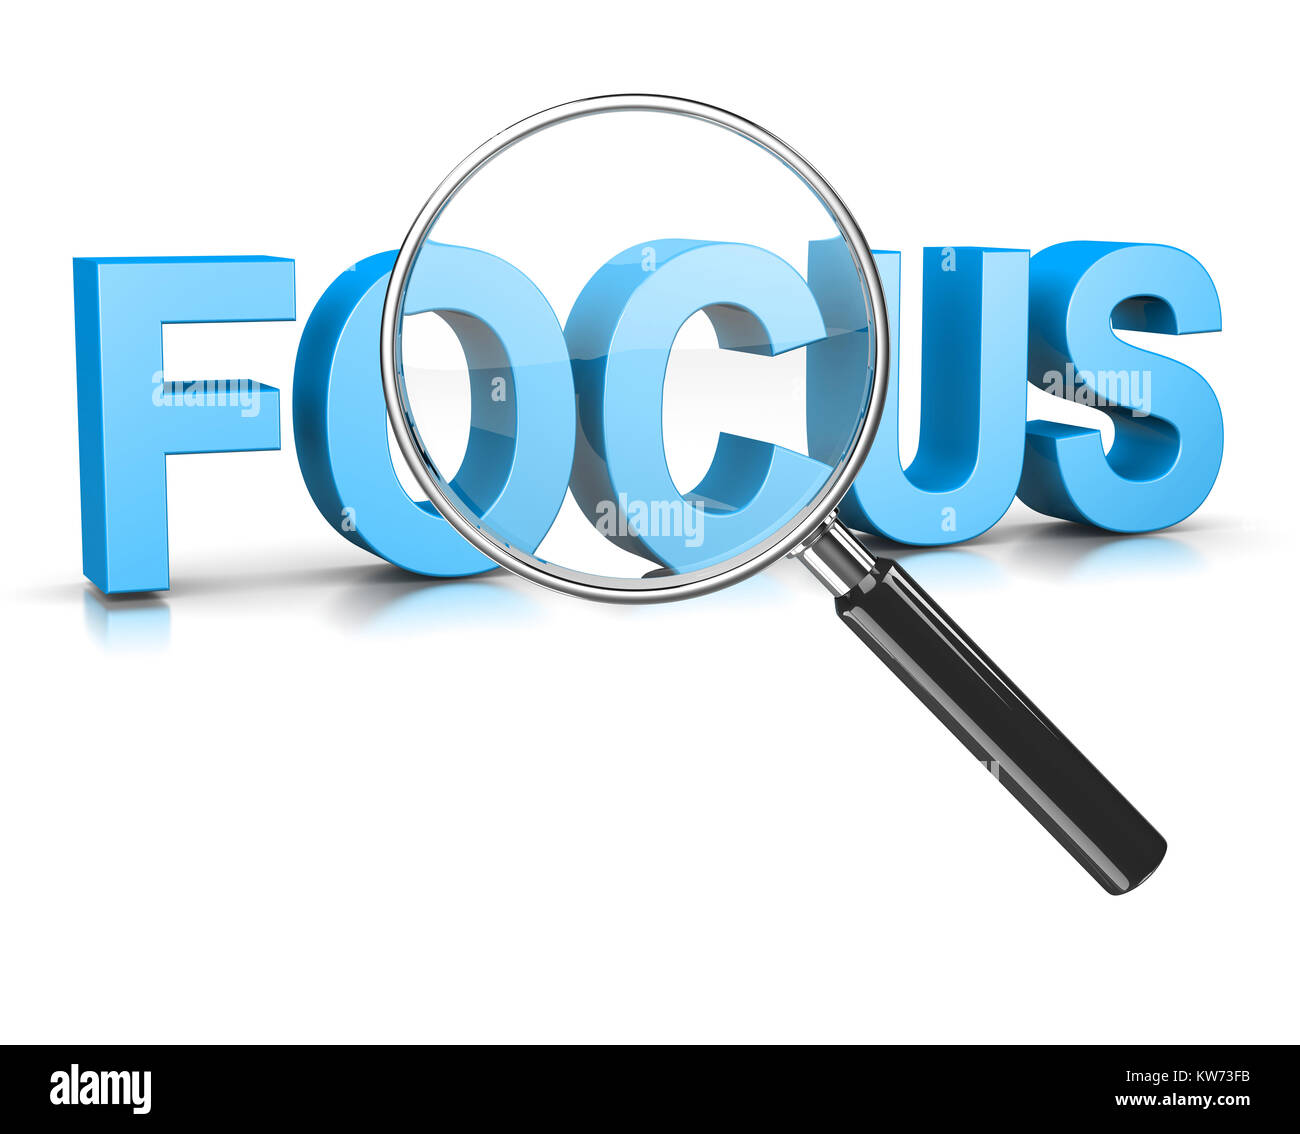 Magnifier Glass Focused on Focus Blue Text 3D Illustration on White Stock Photo